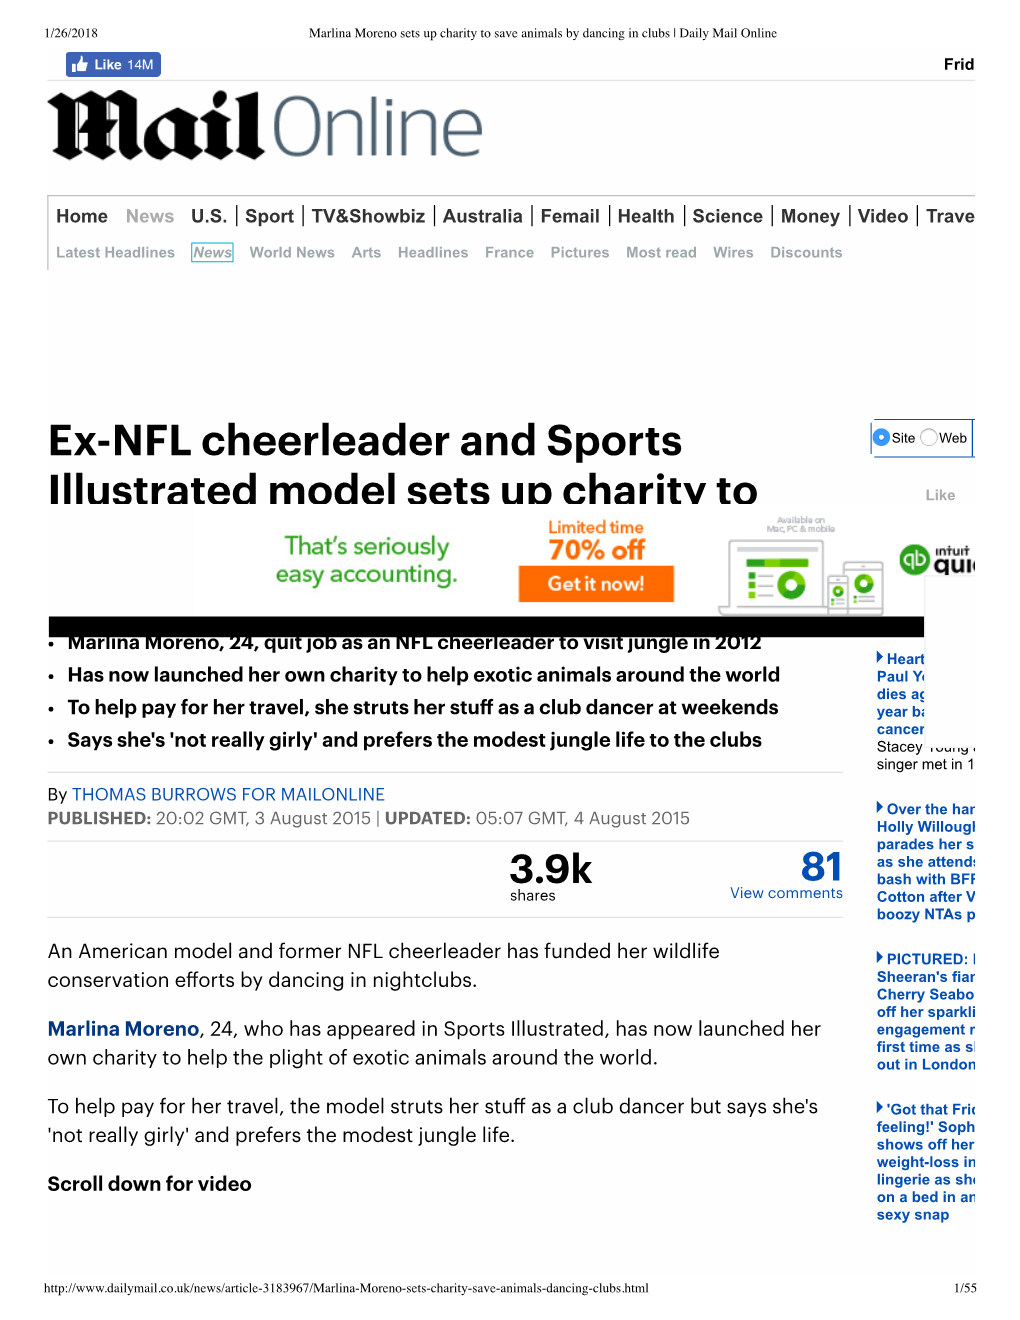 Ex-NFL Cheerleader and Sports Illustrated Model Sets up Charity To